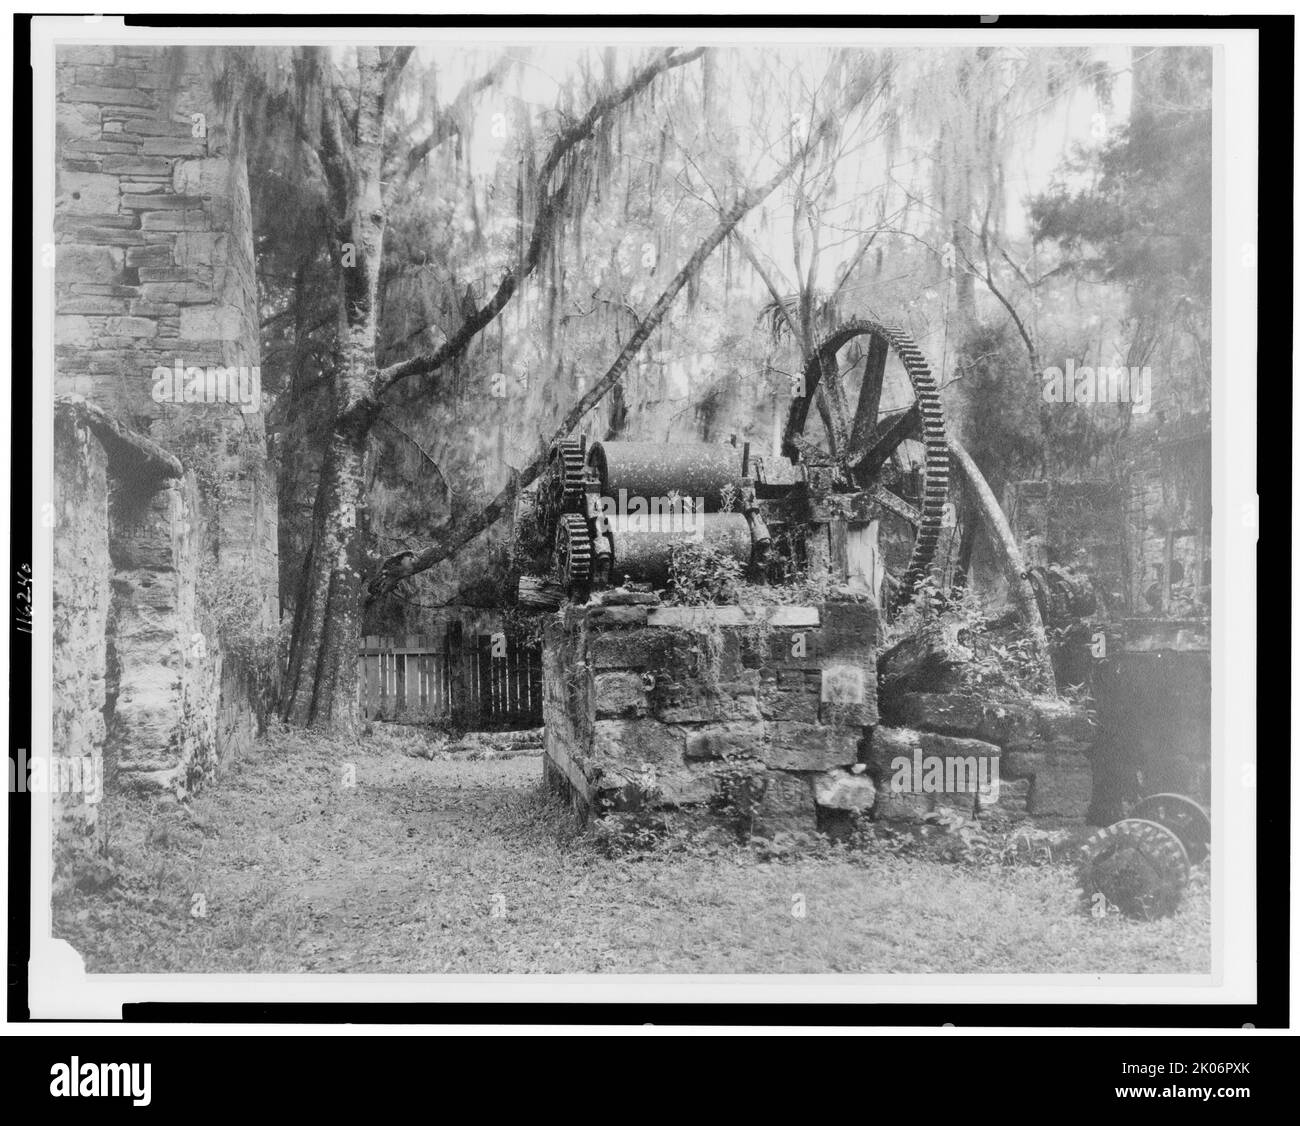 Ruins of an early sugar mill, Orange City, Volusia Co., Florida, between 1936 and 1939. (Such machines were used on slave plantations to process sugar. The slaves would feed lengths of cane between the rotating drums to squeeze out the juice. This was exhausting and dangerous work, and white overseers wouldn't necessarily stop the machine if a hand or arm was crushed between the rollers). Stock Photo